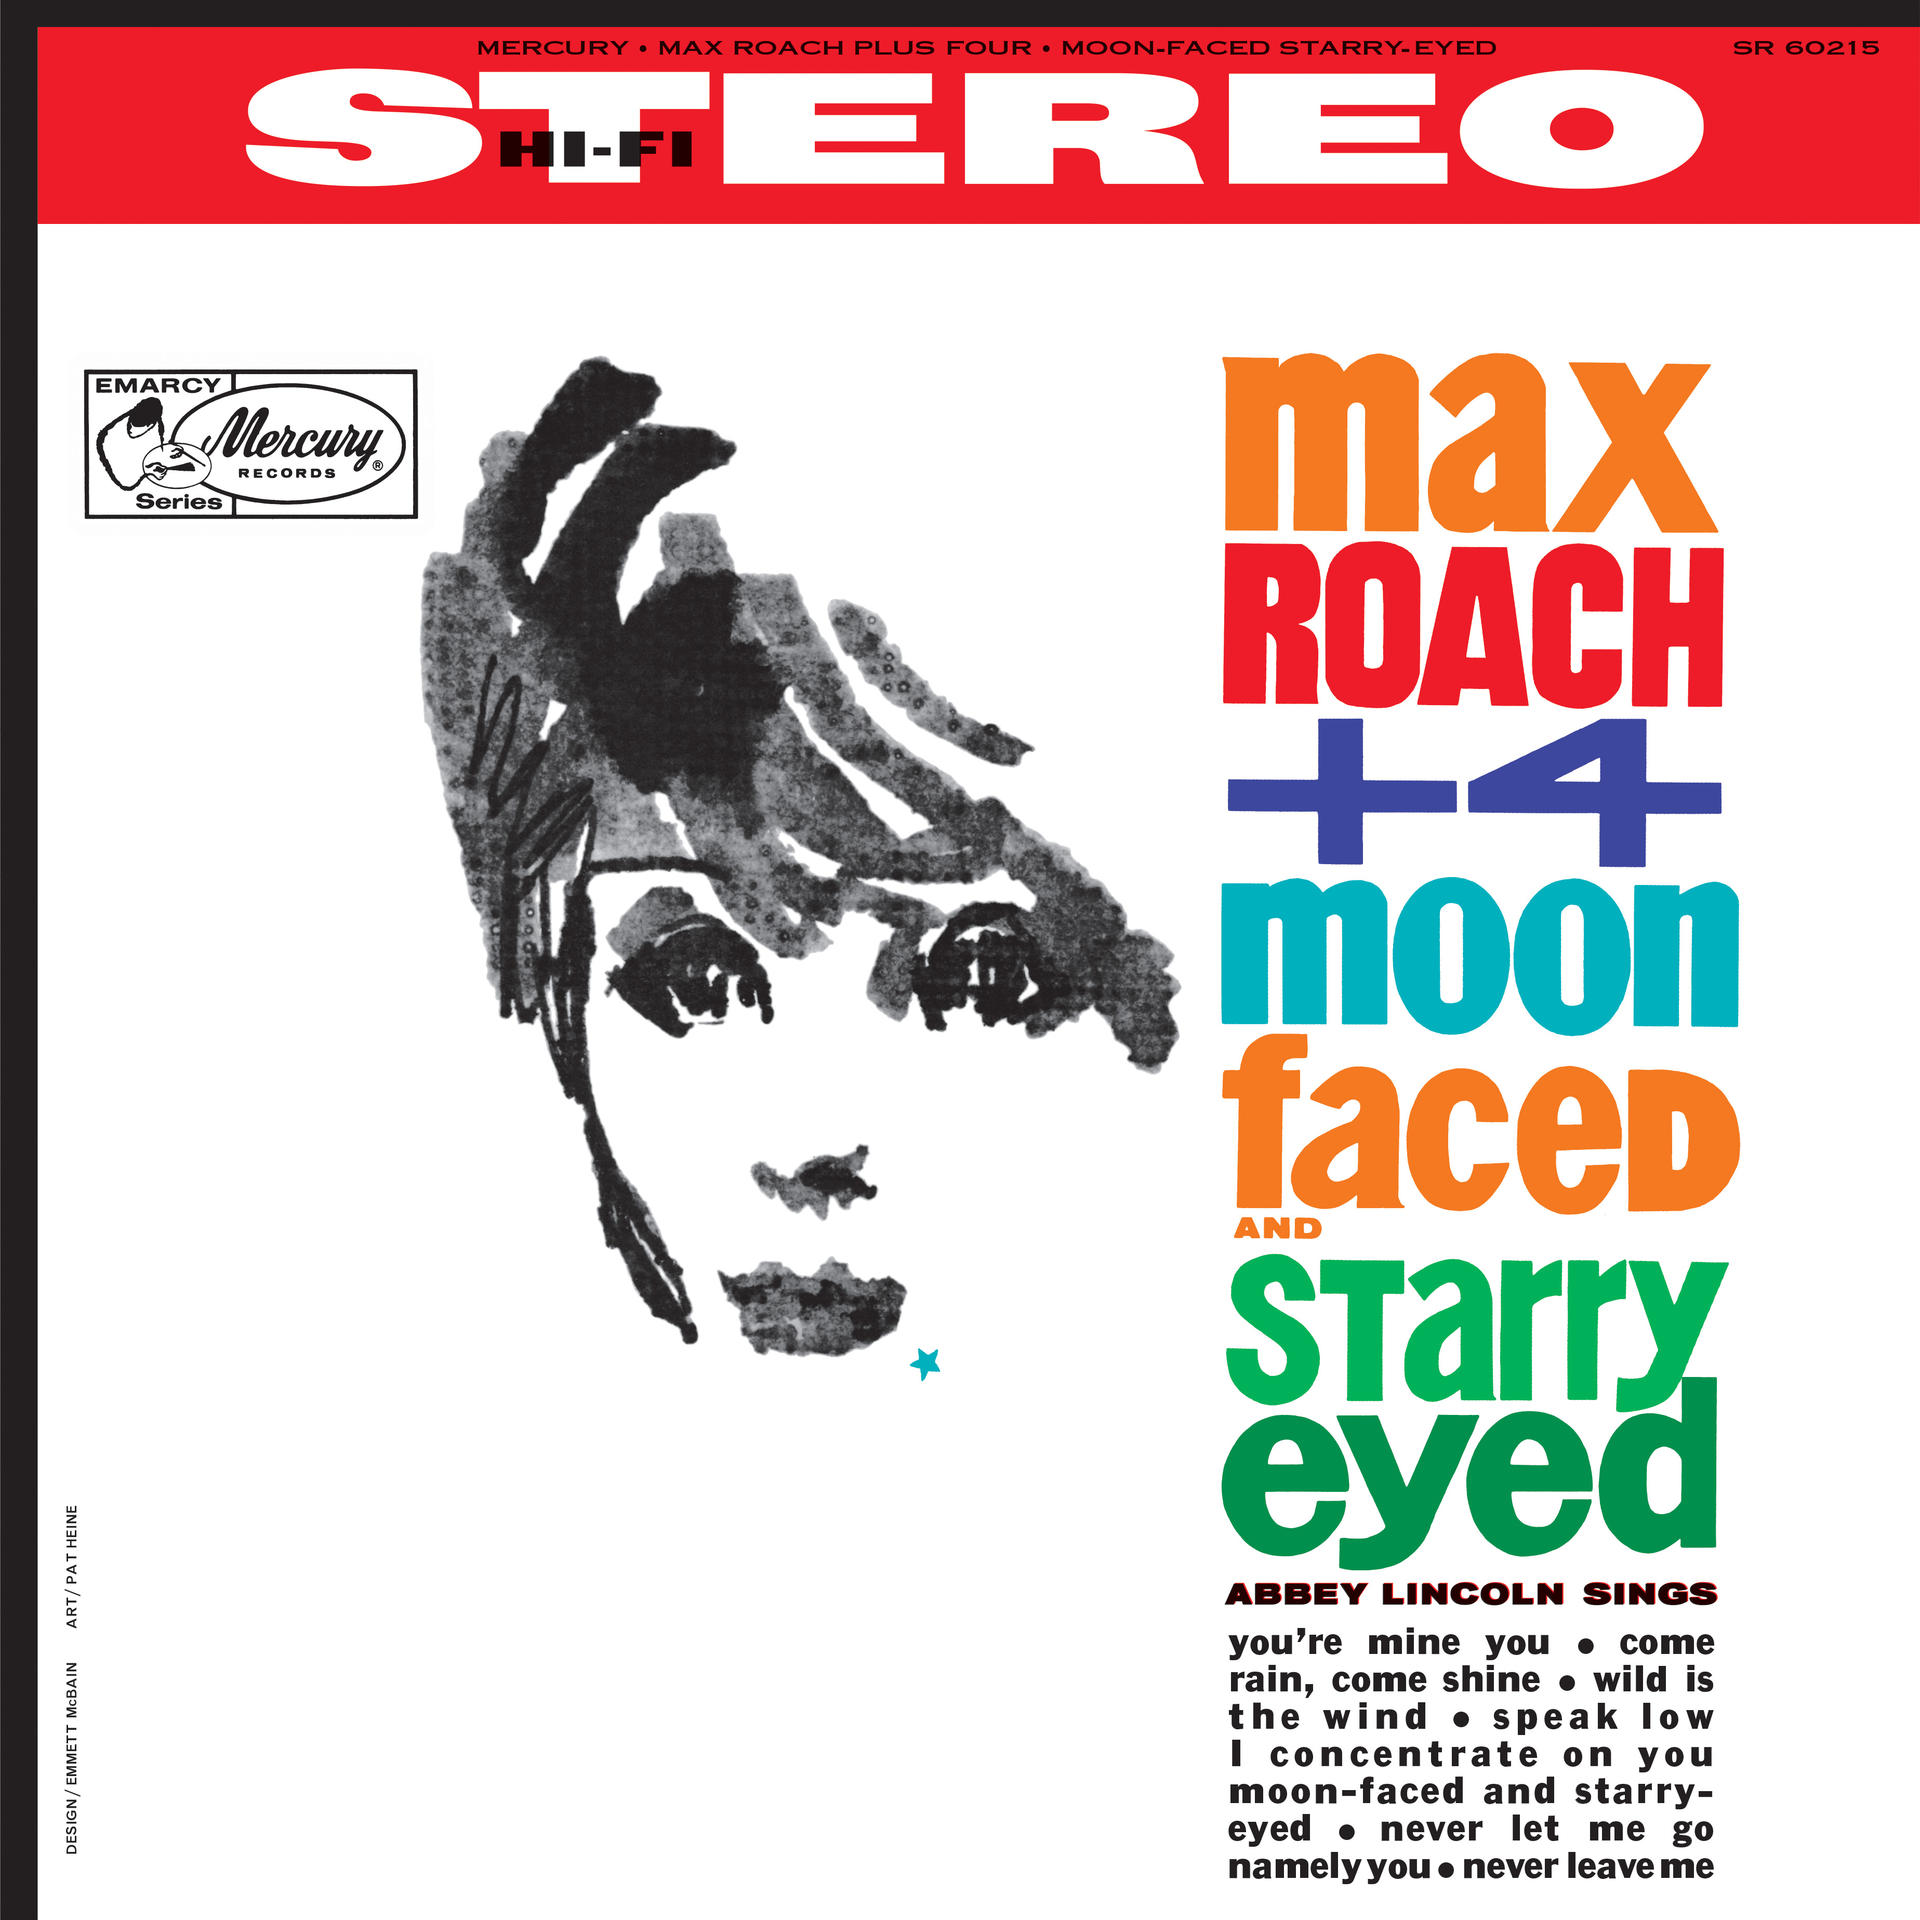 and - Request) - Moon-Faced (Verve Starry-Eyed Roach (Vinyl) Max by